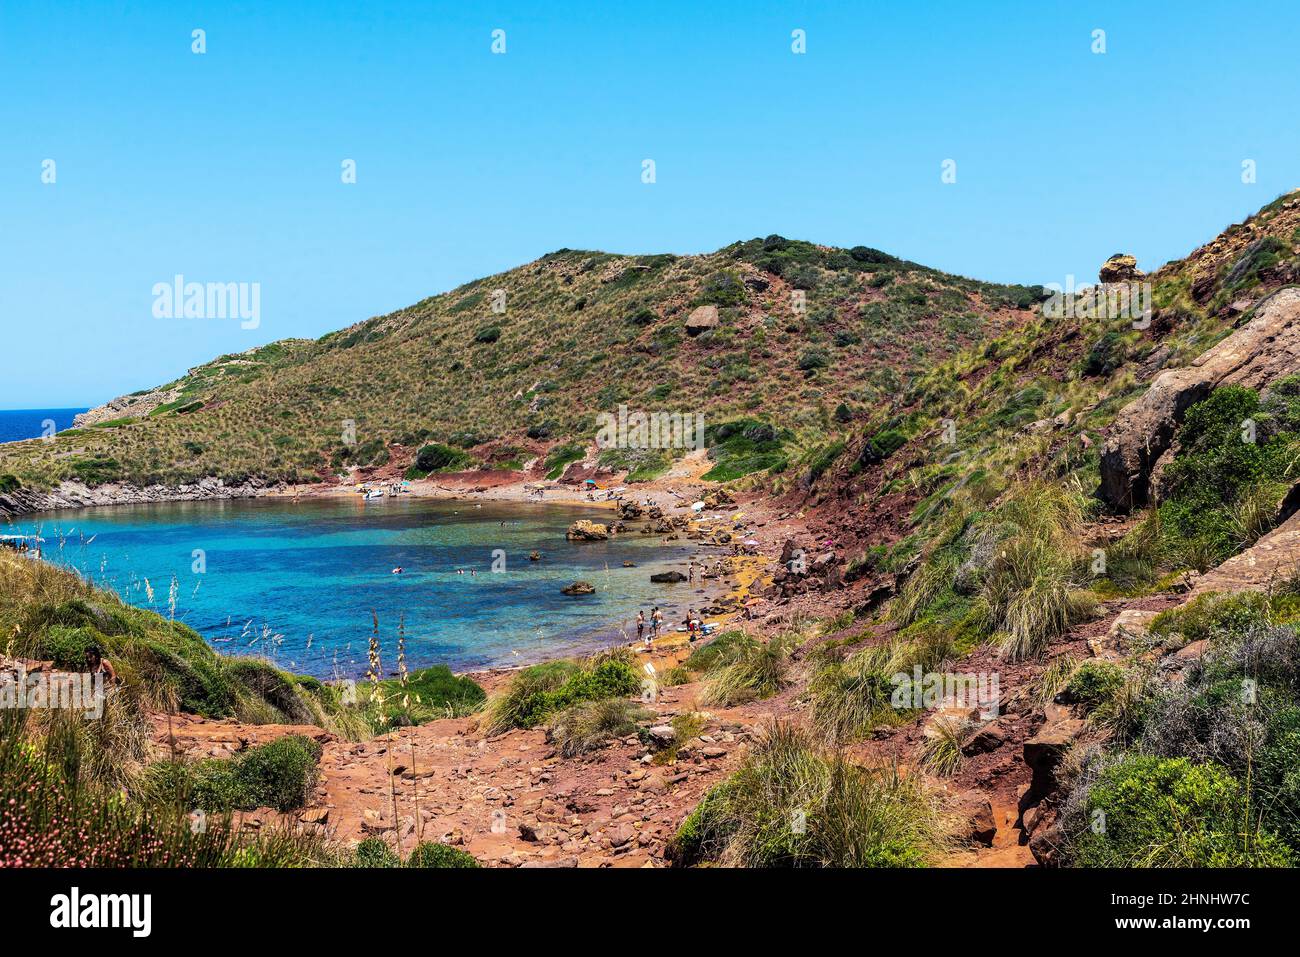 Overview of the Cavalleria beach with people around in Menorca, Balearic island, Spain Stock Photo